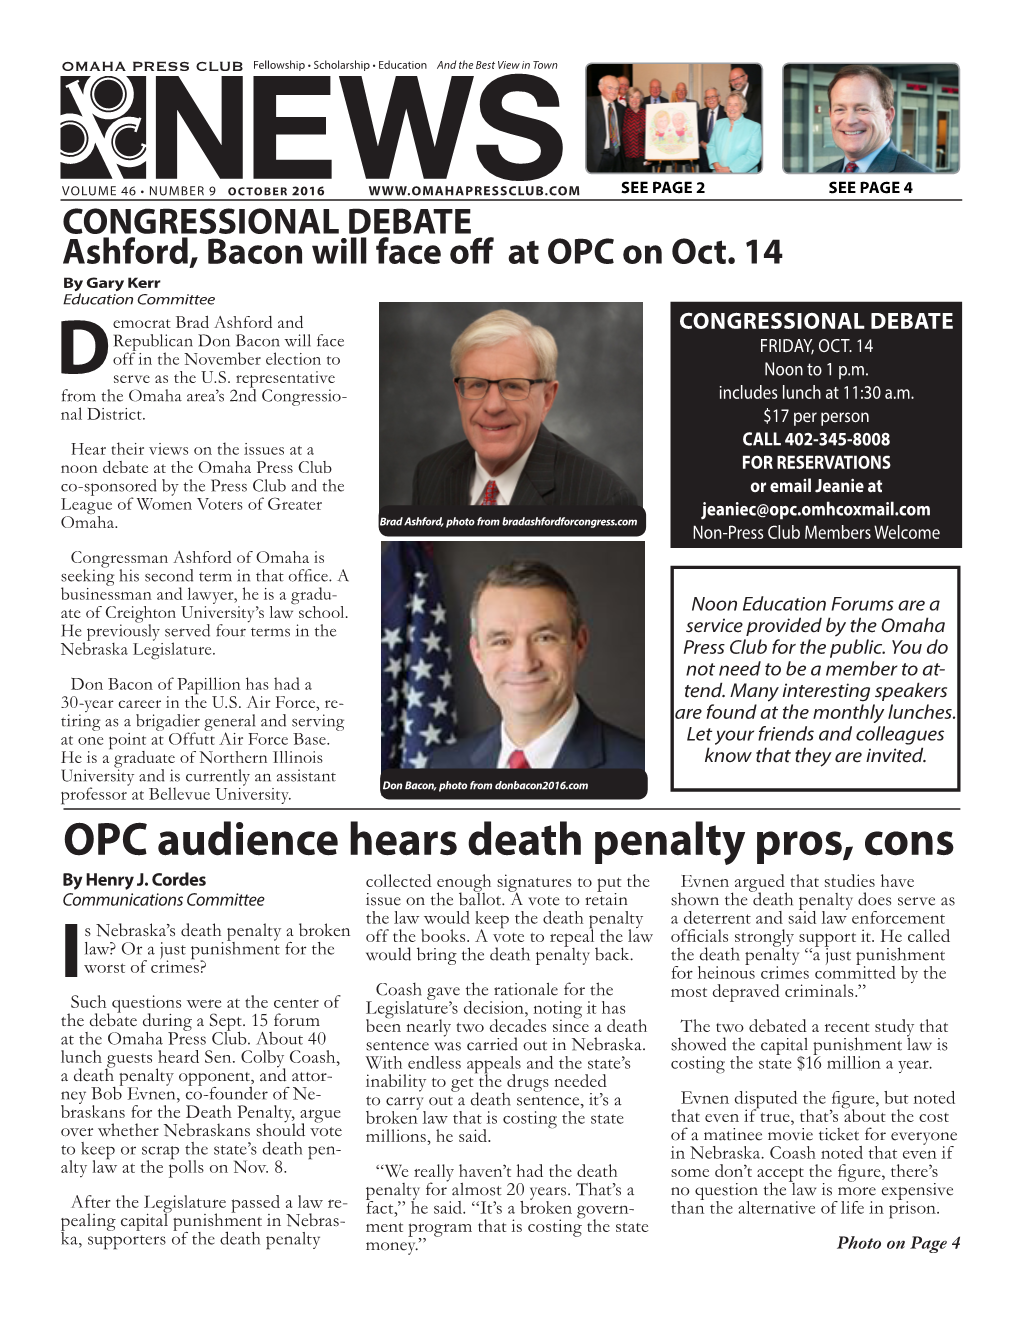 OPC Audience Hears Death Penalty Pros, Cons by Henry J